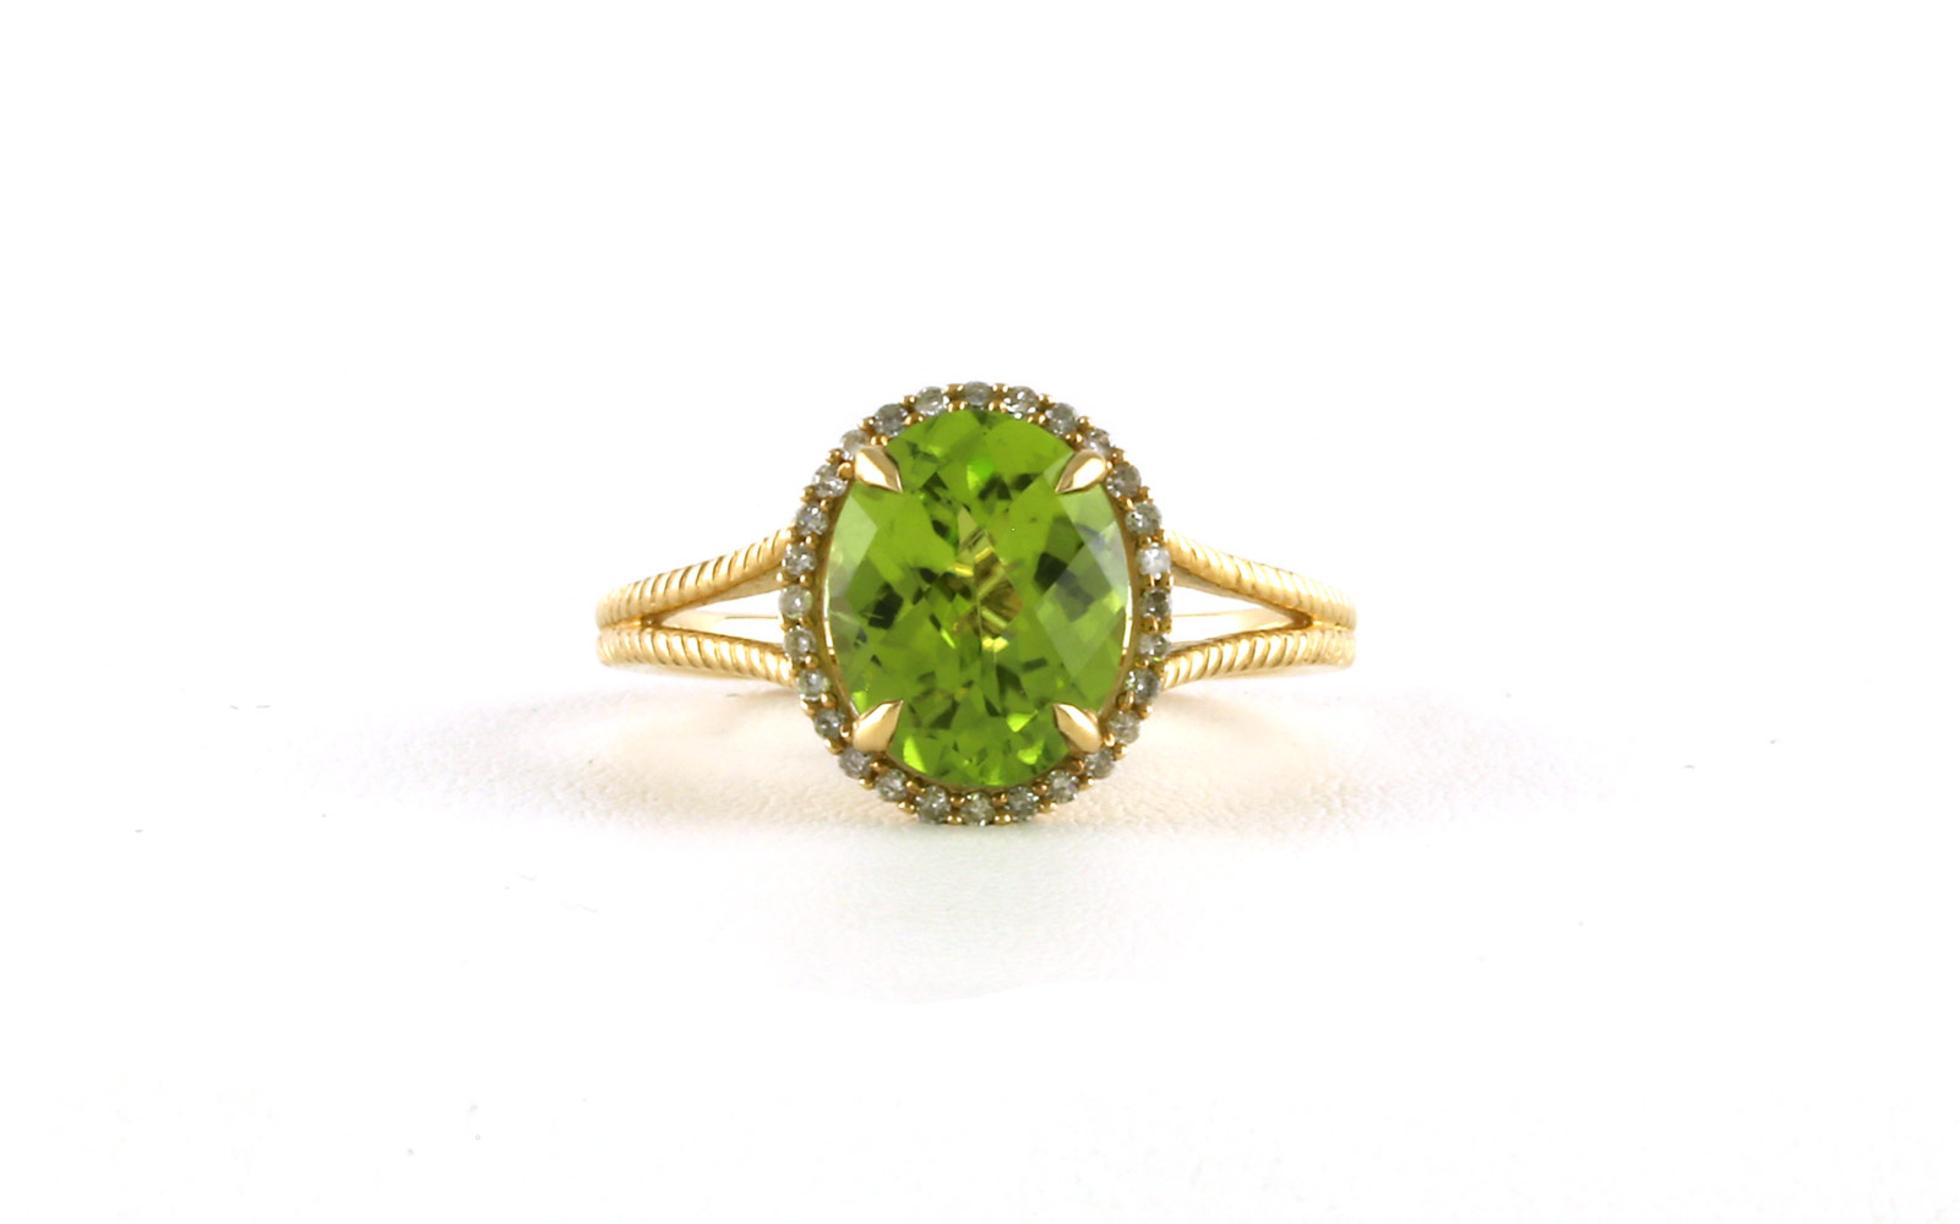 Halo-style Oval Peridot and Diamond Ring in Yellow Gold